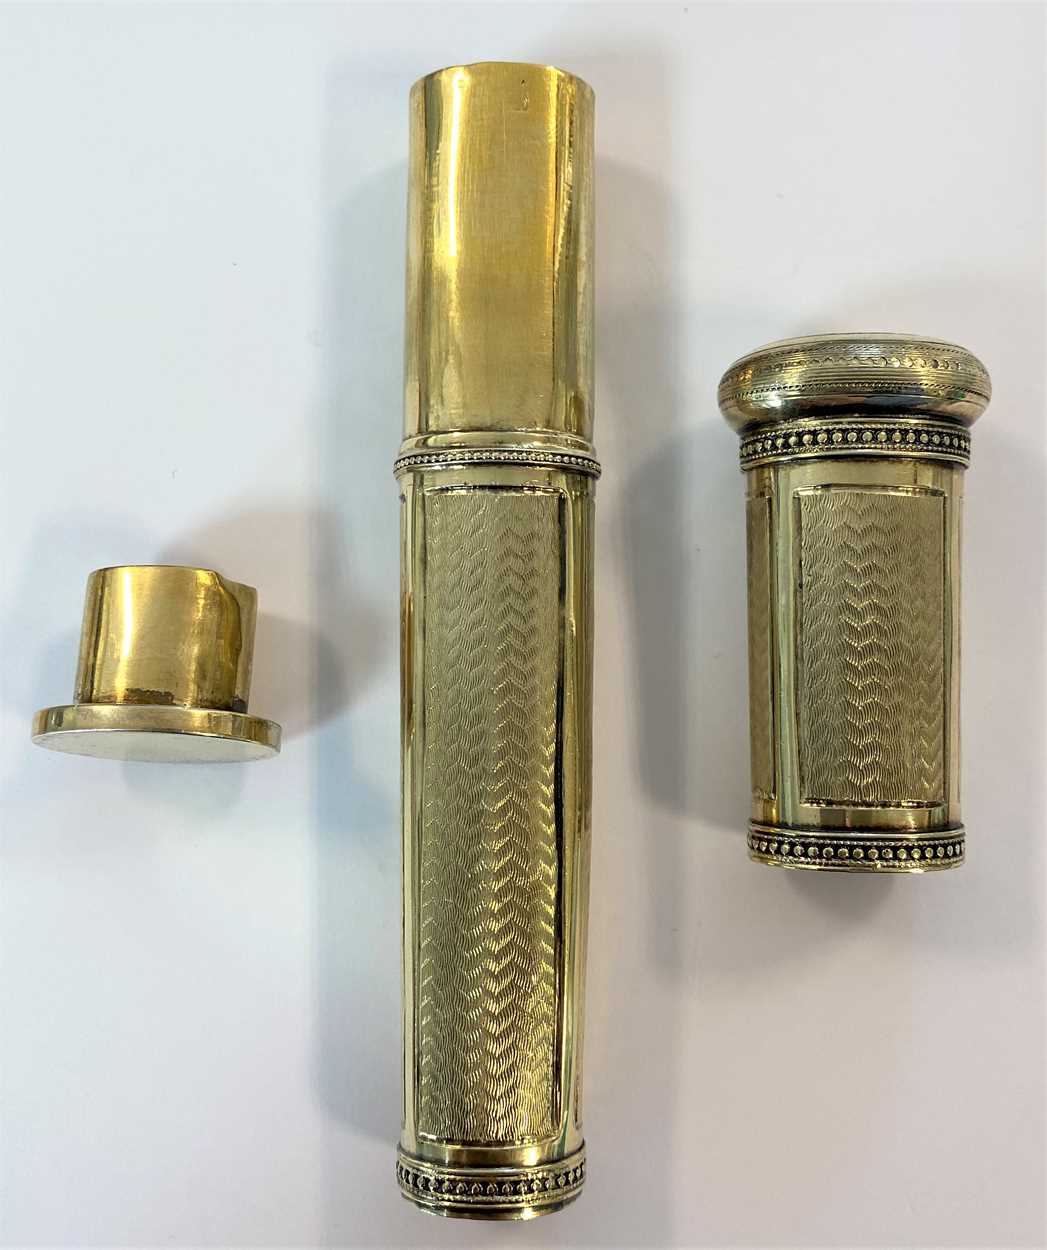 An early 20th century French metalwares vermeil étui-à-cire (sealing wax case), - Image 4 of 10